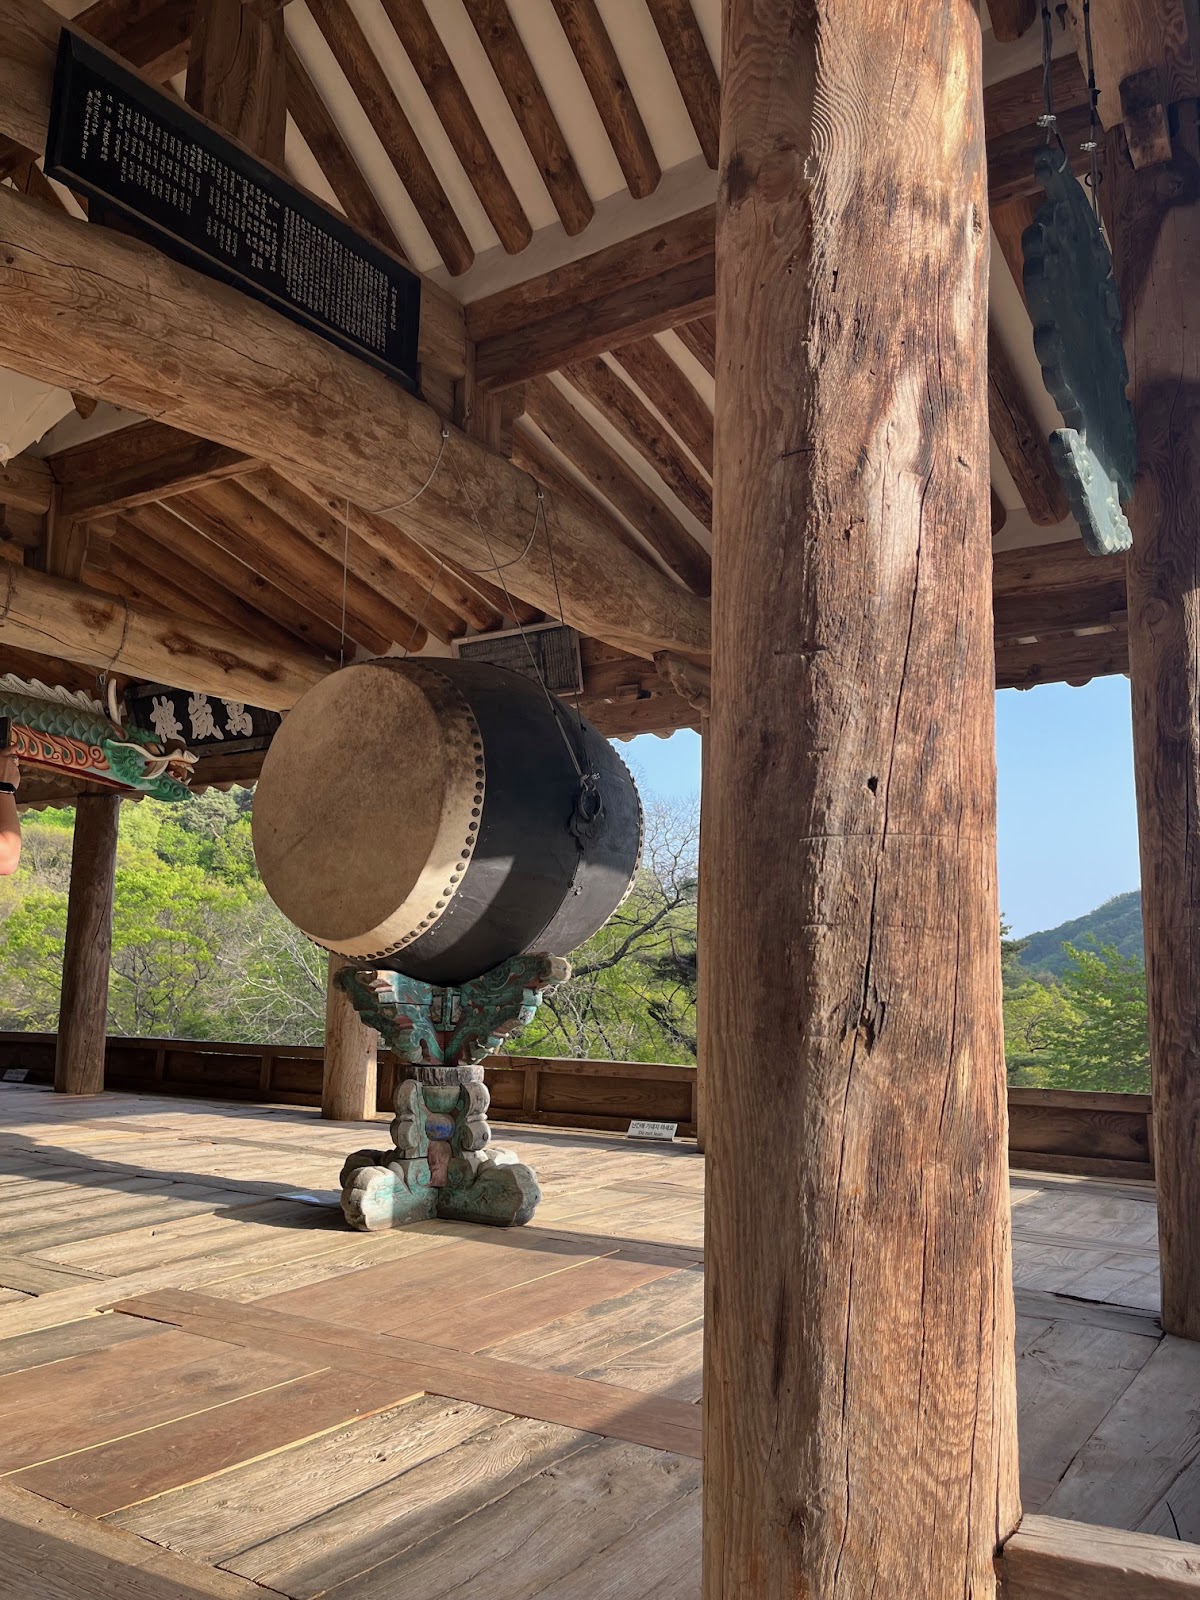 Bang on the drum. At the oldest temple near Andong, South Korea.